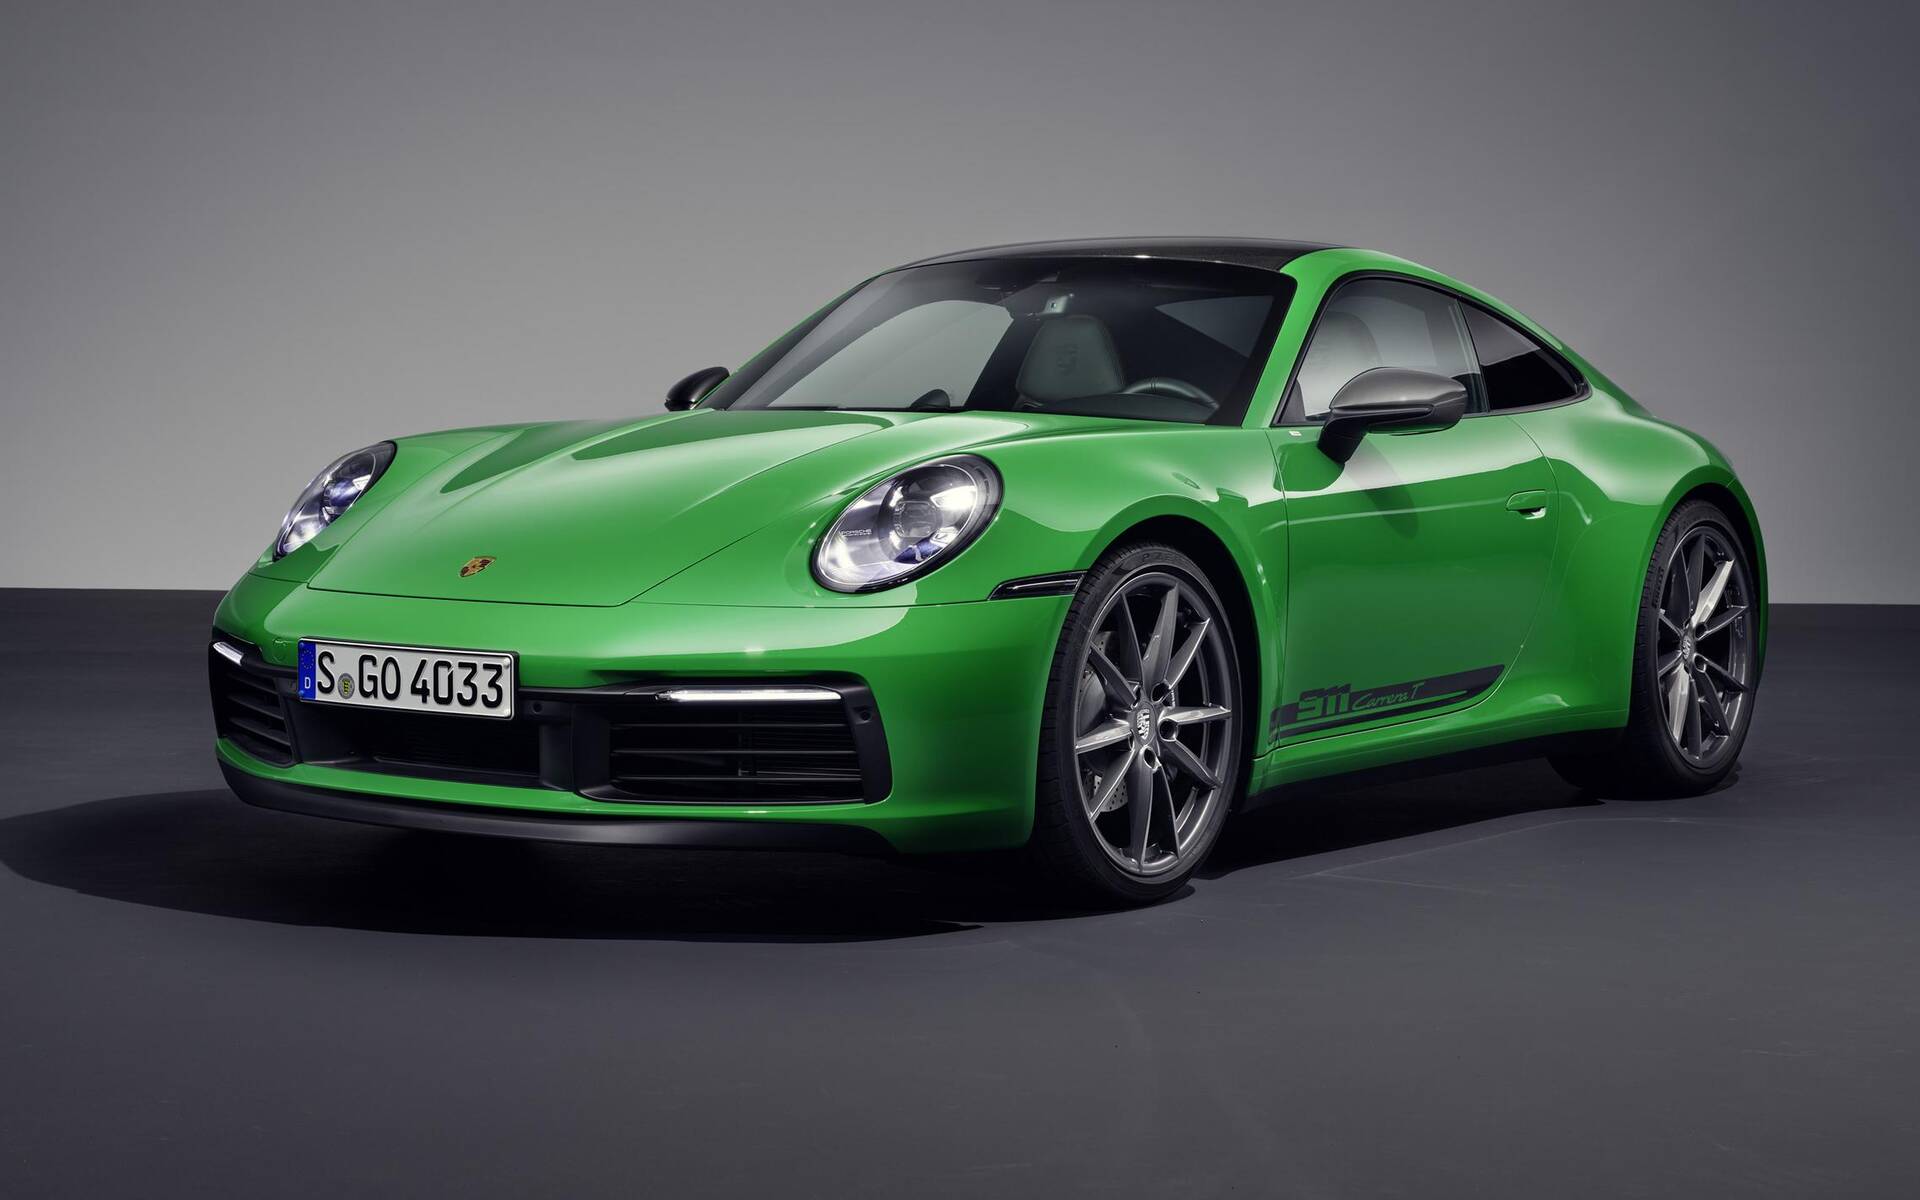 Porsche is the world's most valuable luxury brand